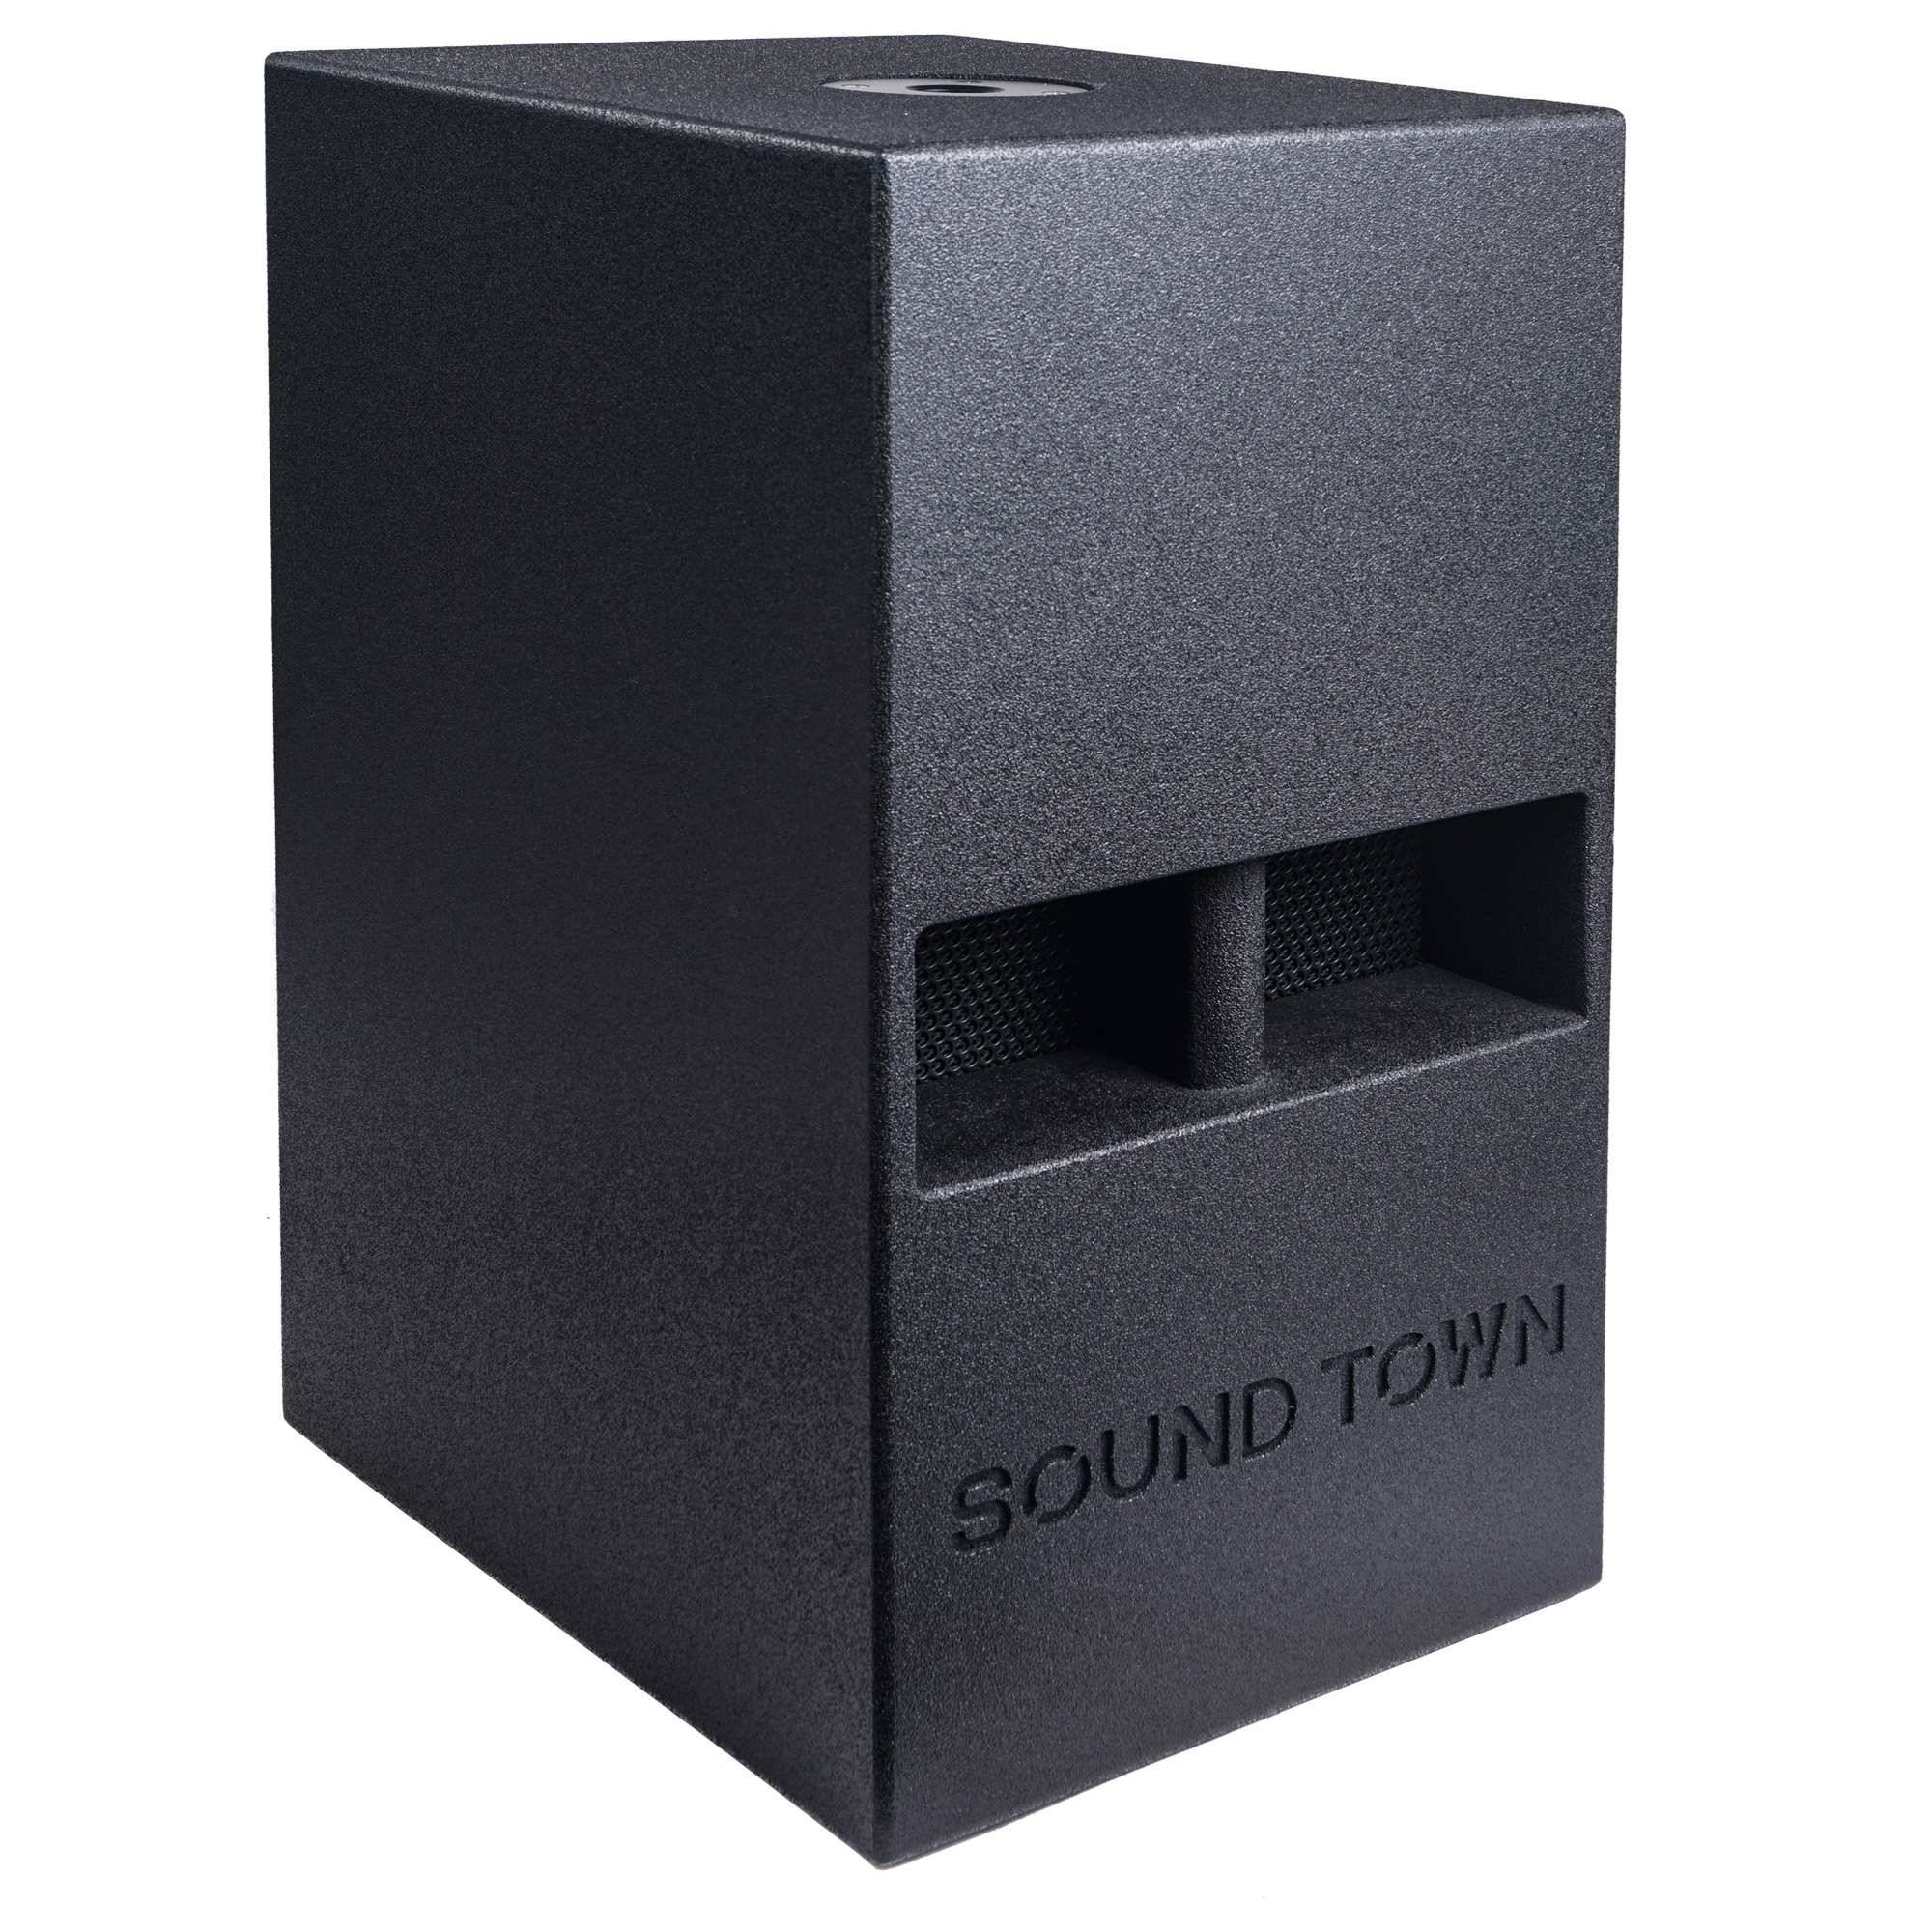 Sound Town Powered Column Speaker Line Array System with One 6 x 5” Column Speaker and One 12” Subwoofer for Live Music, House of Worship, Meeting Rooms, Restaurants - image 3 of 7